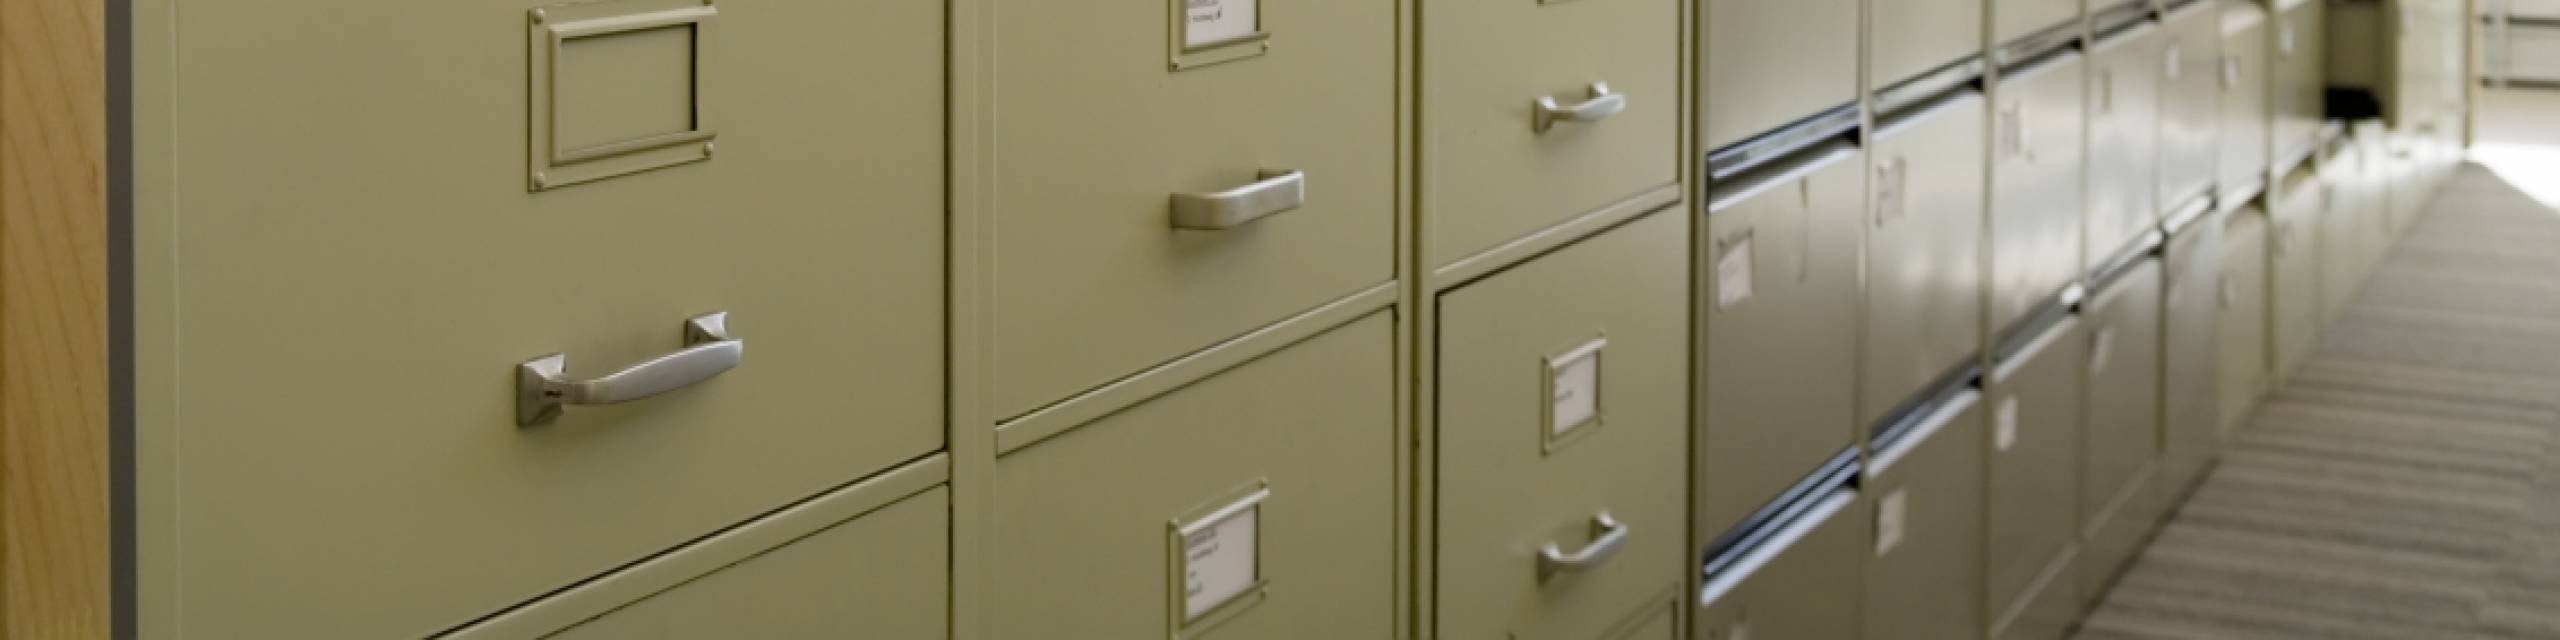 A man looking through a filing cabinet